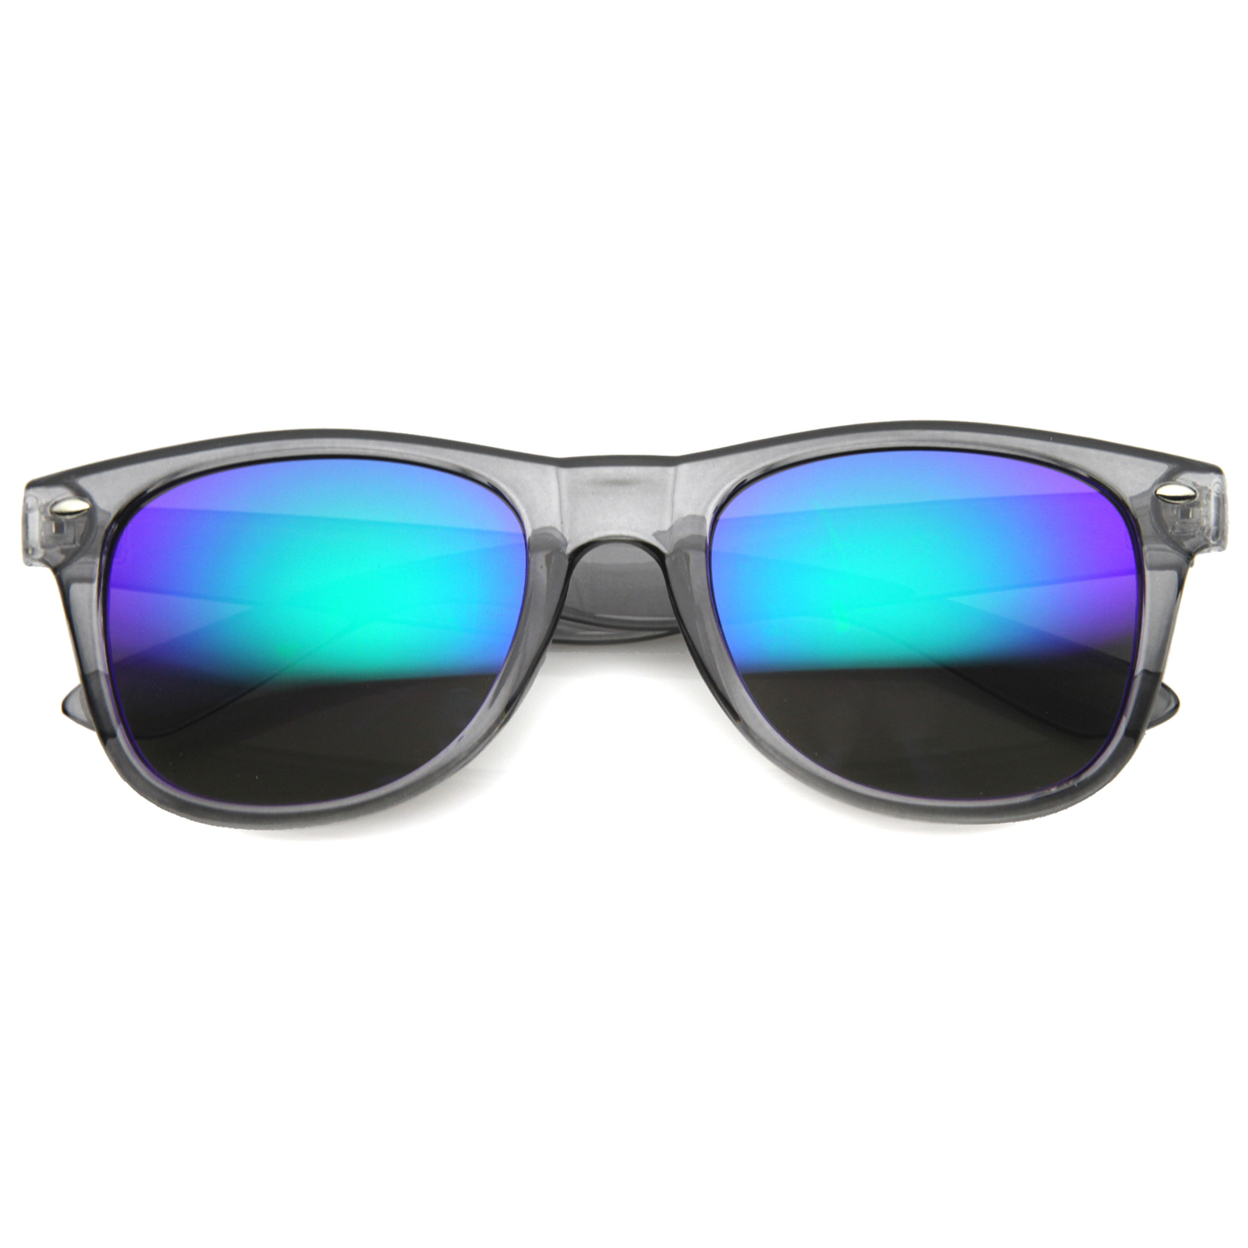 Mens Horn Rimmed Sunglasses With UV400 Protected Mirrored Lens 9947 - Grey / Fire